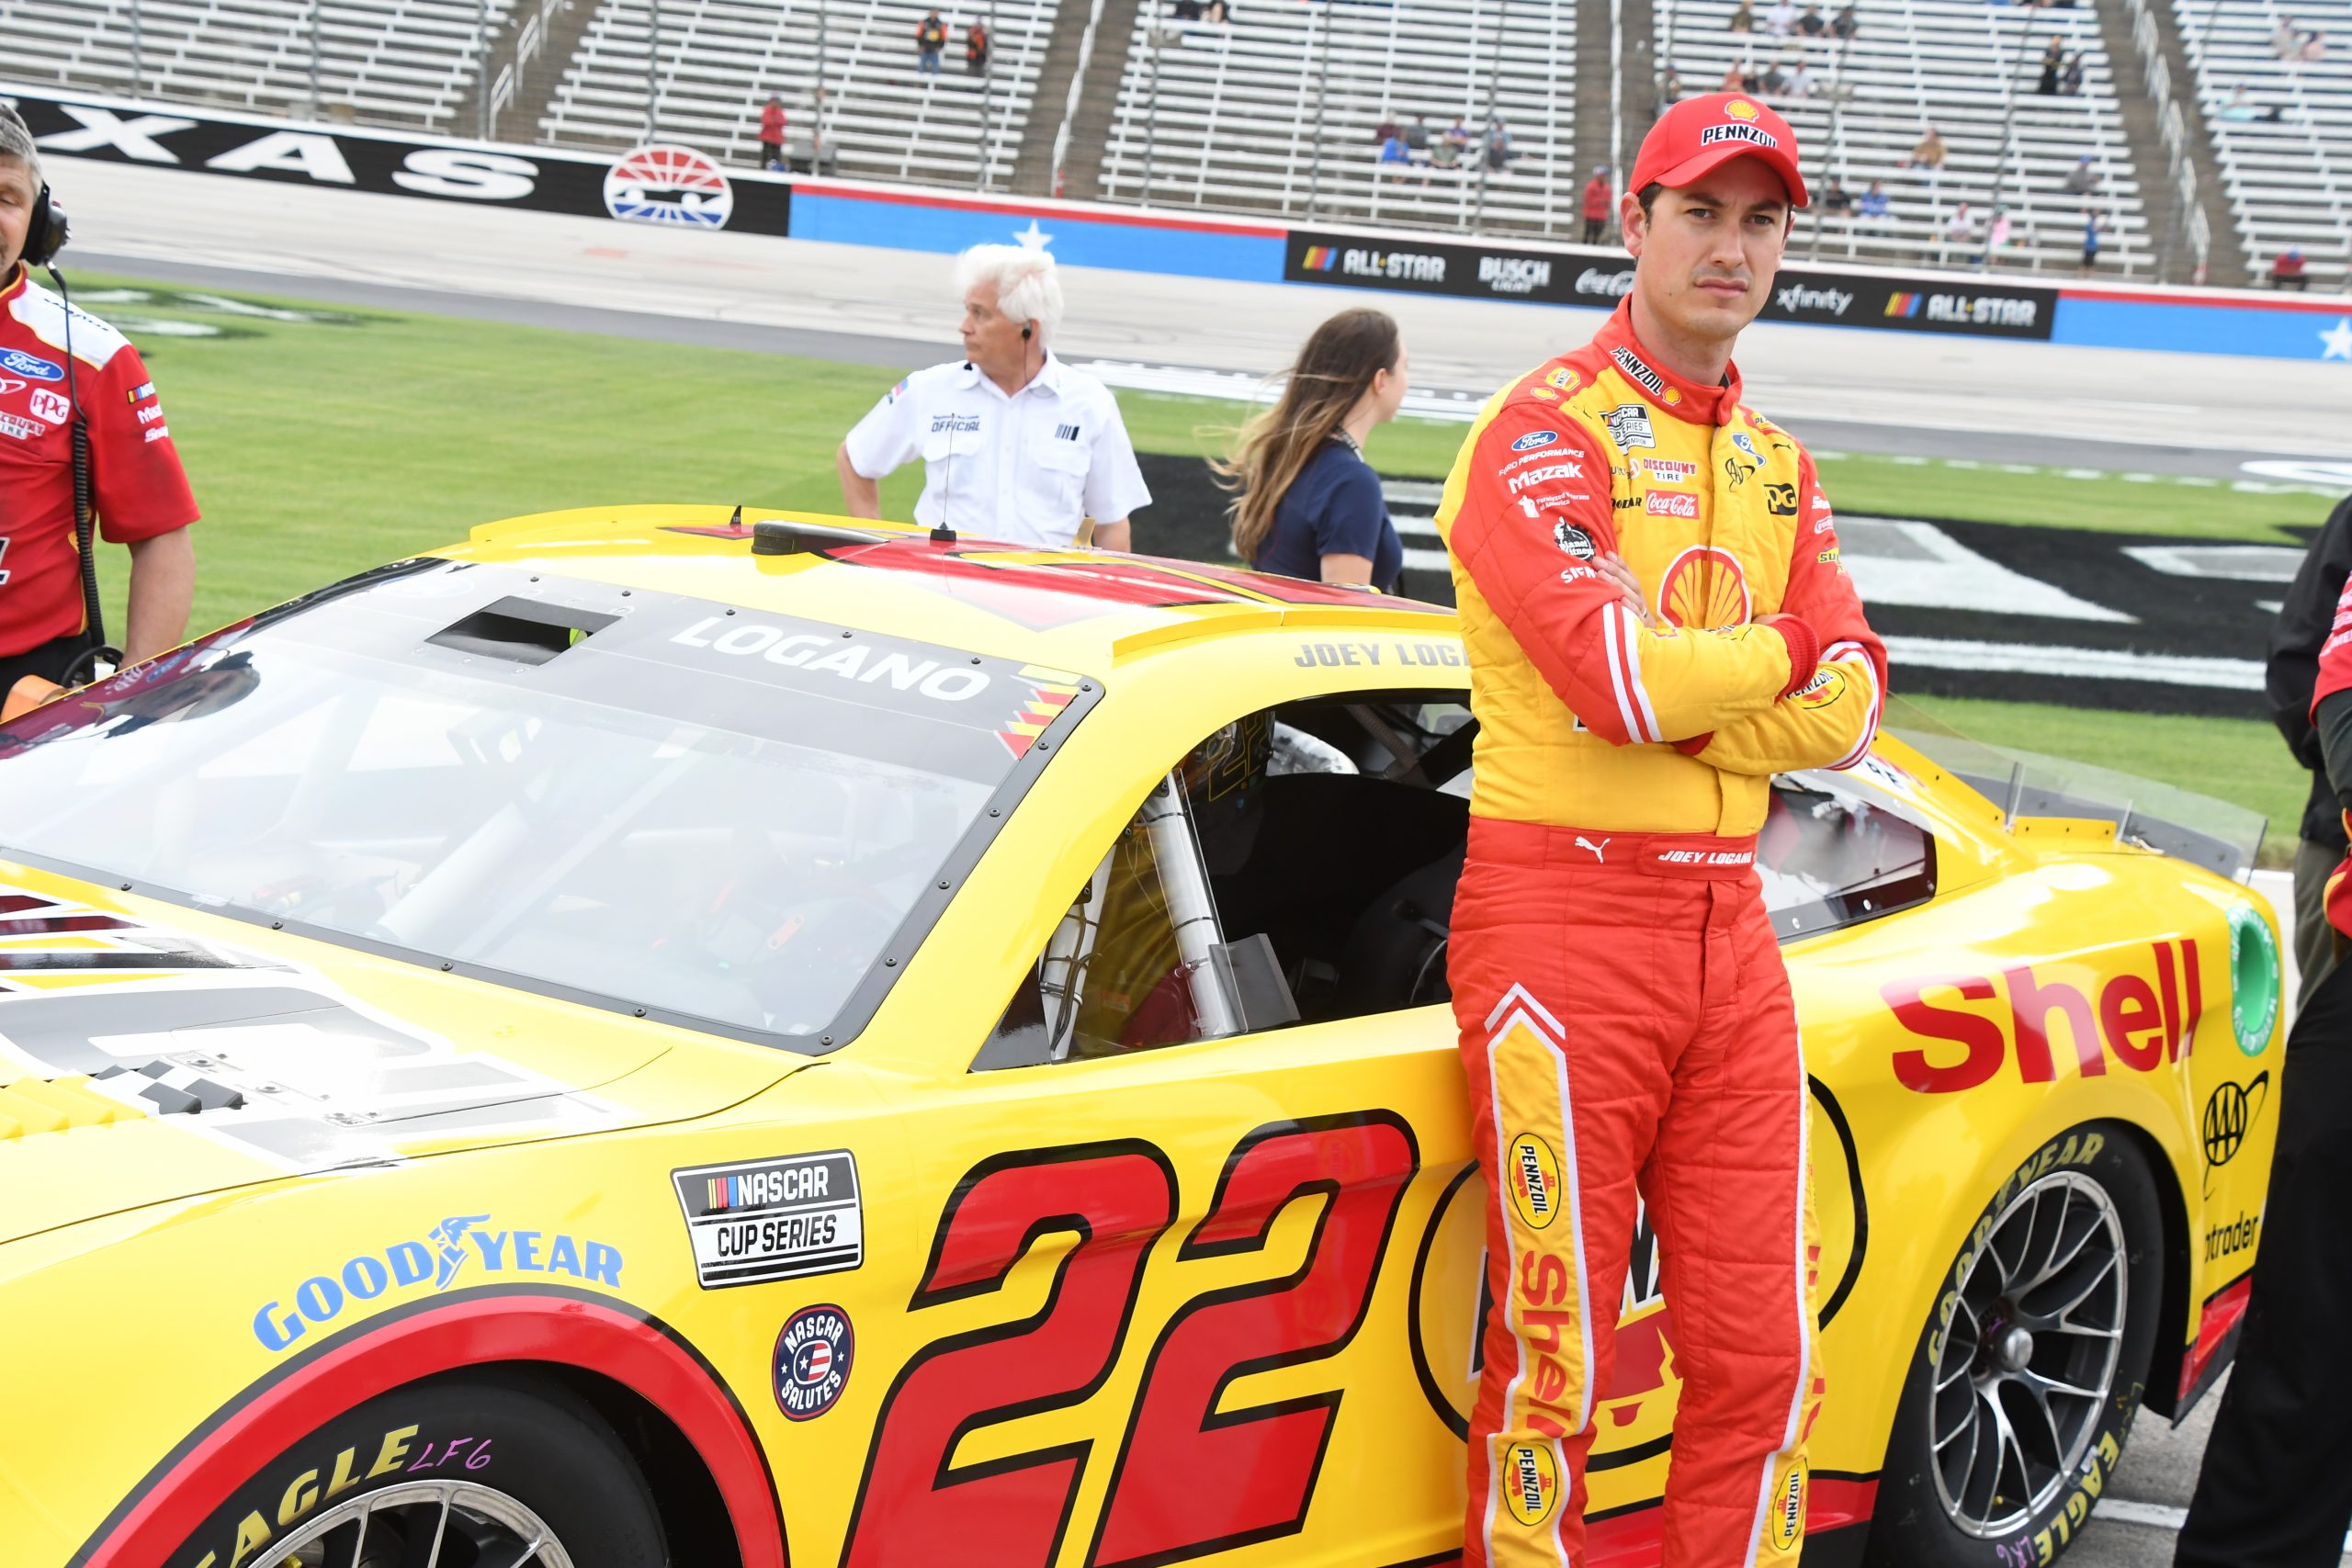 It doesn't take much to guess one of Logano's talents. (Photo: Sean Folsom | The Podium Finish)